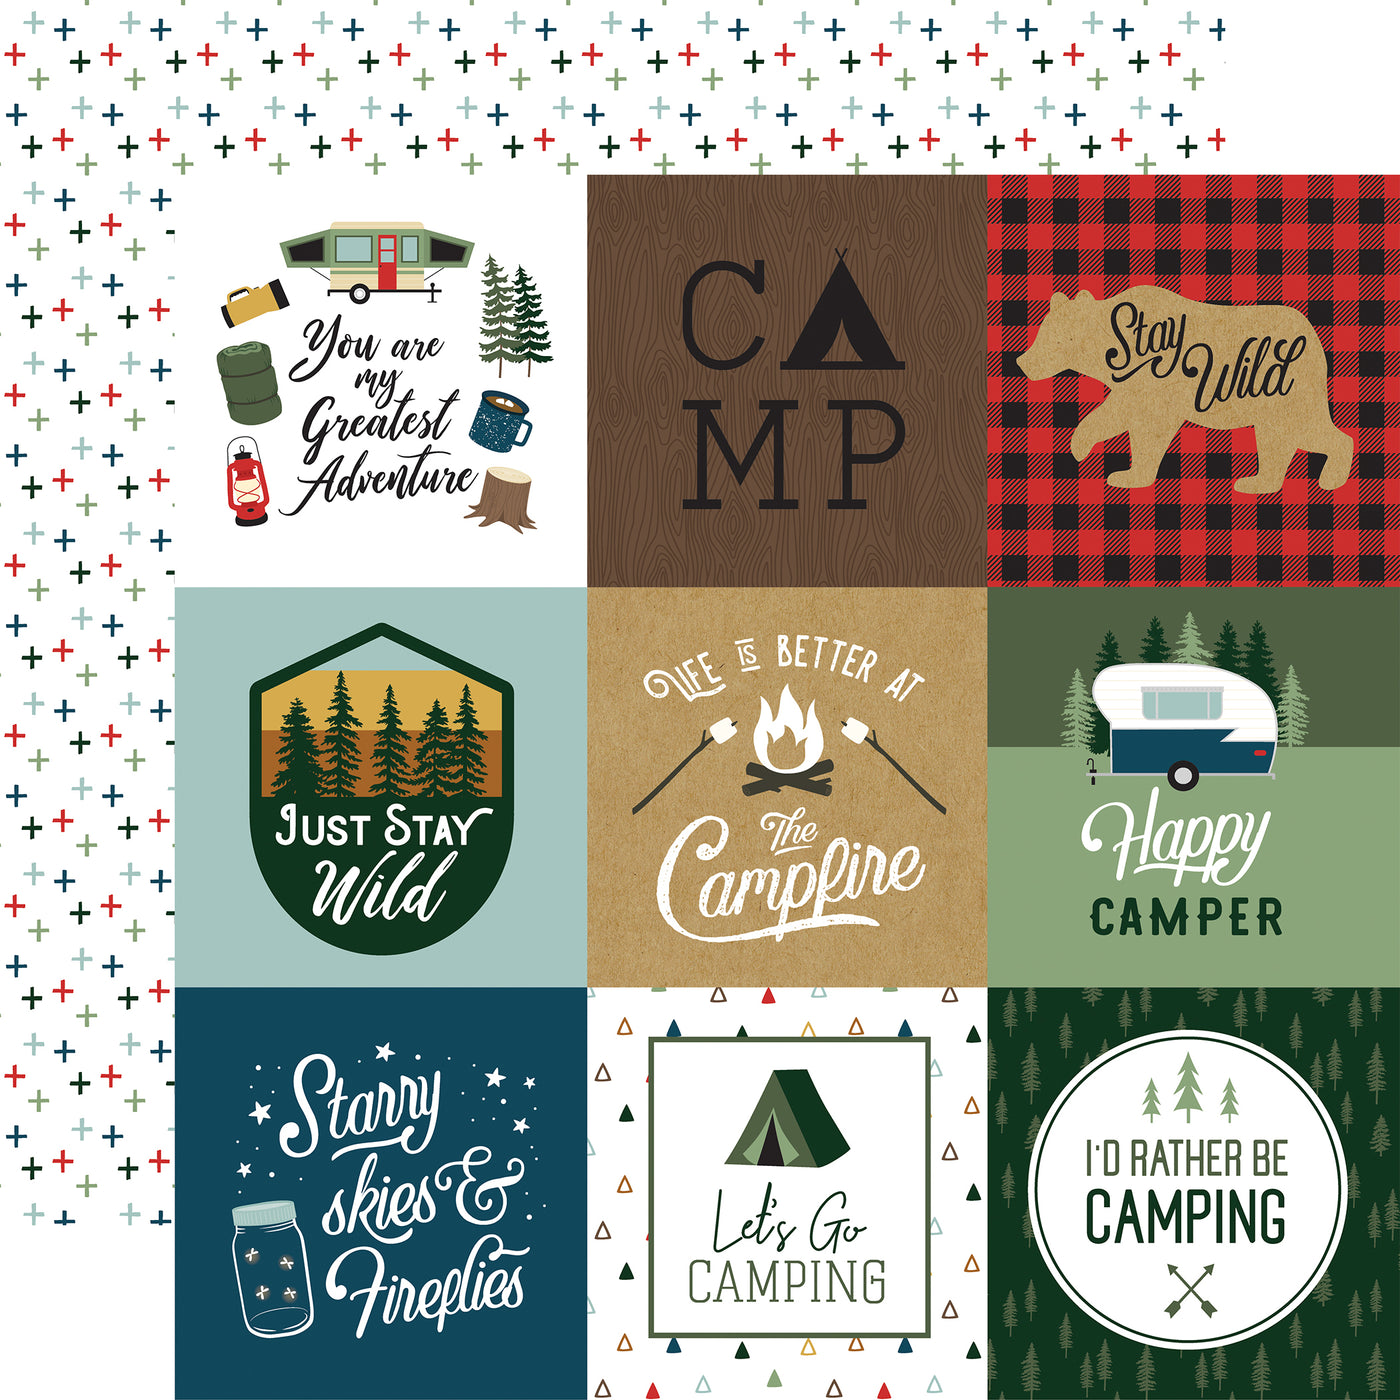 LET'S GO CAMPING 12x12 Collection Kit - Echo Park